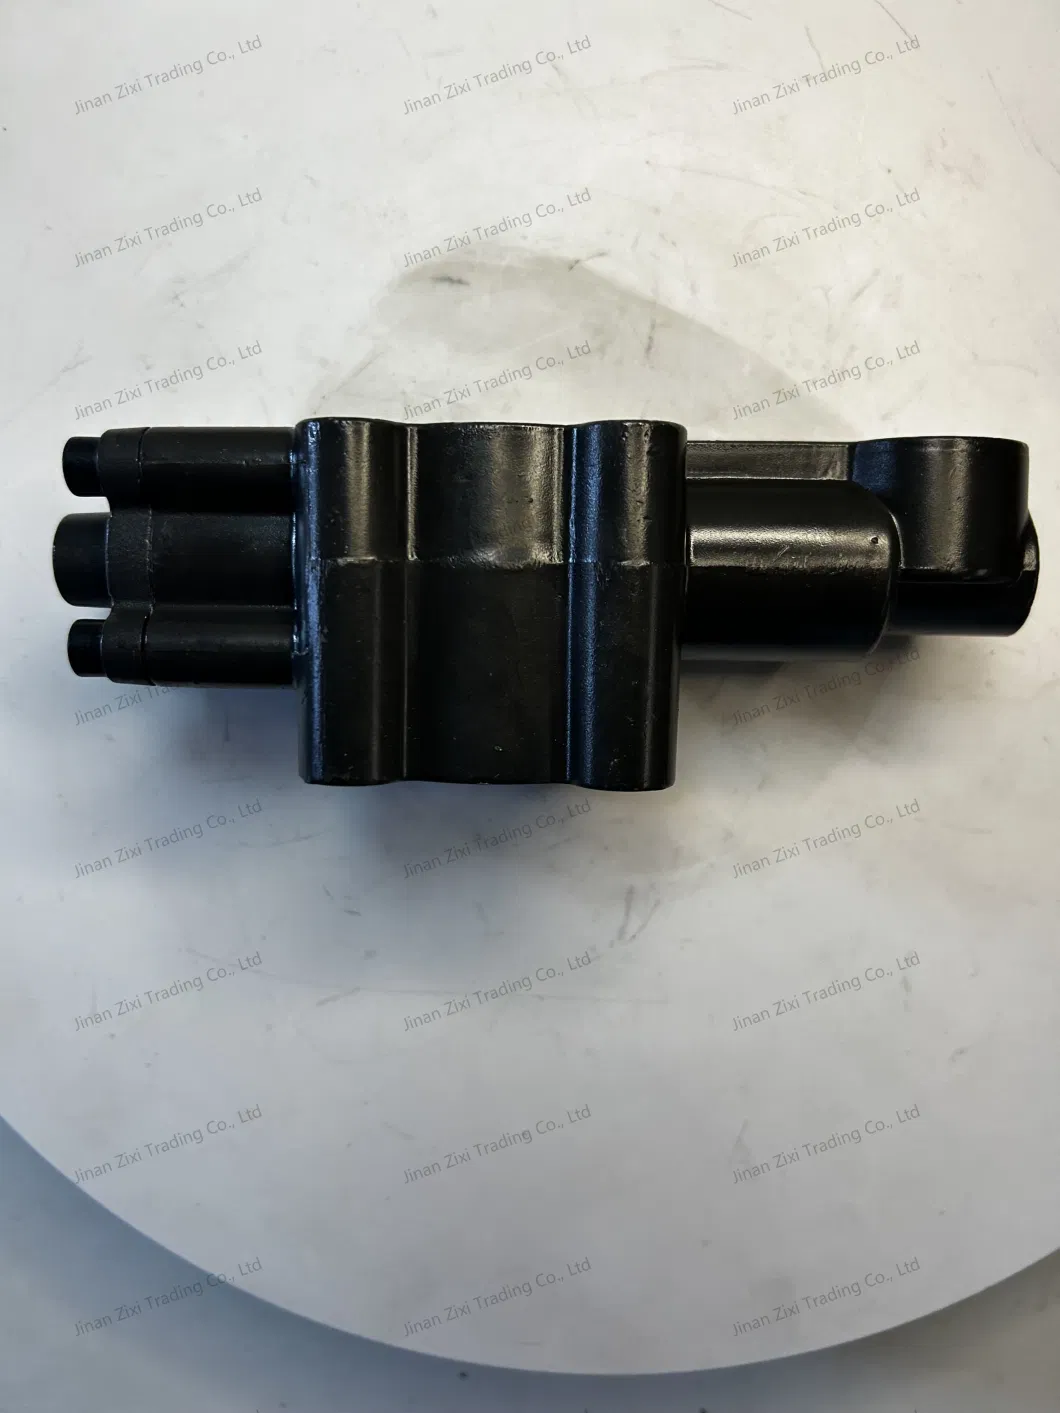 Wg2203250010 HOWO Truck Parts, Good Quality, Low Price, High Quality Pneumatic Lock Valve